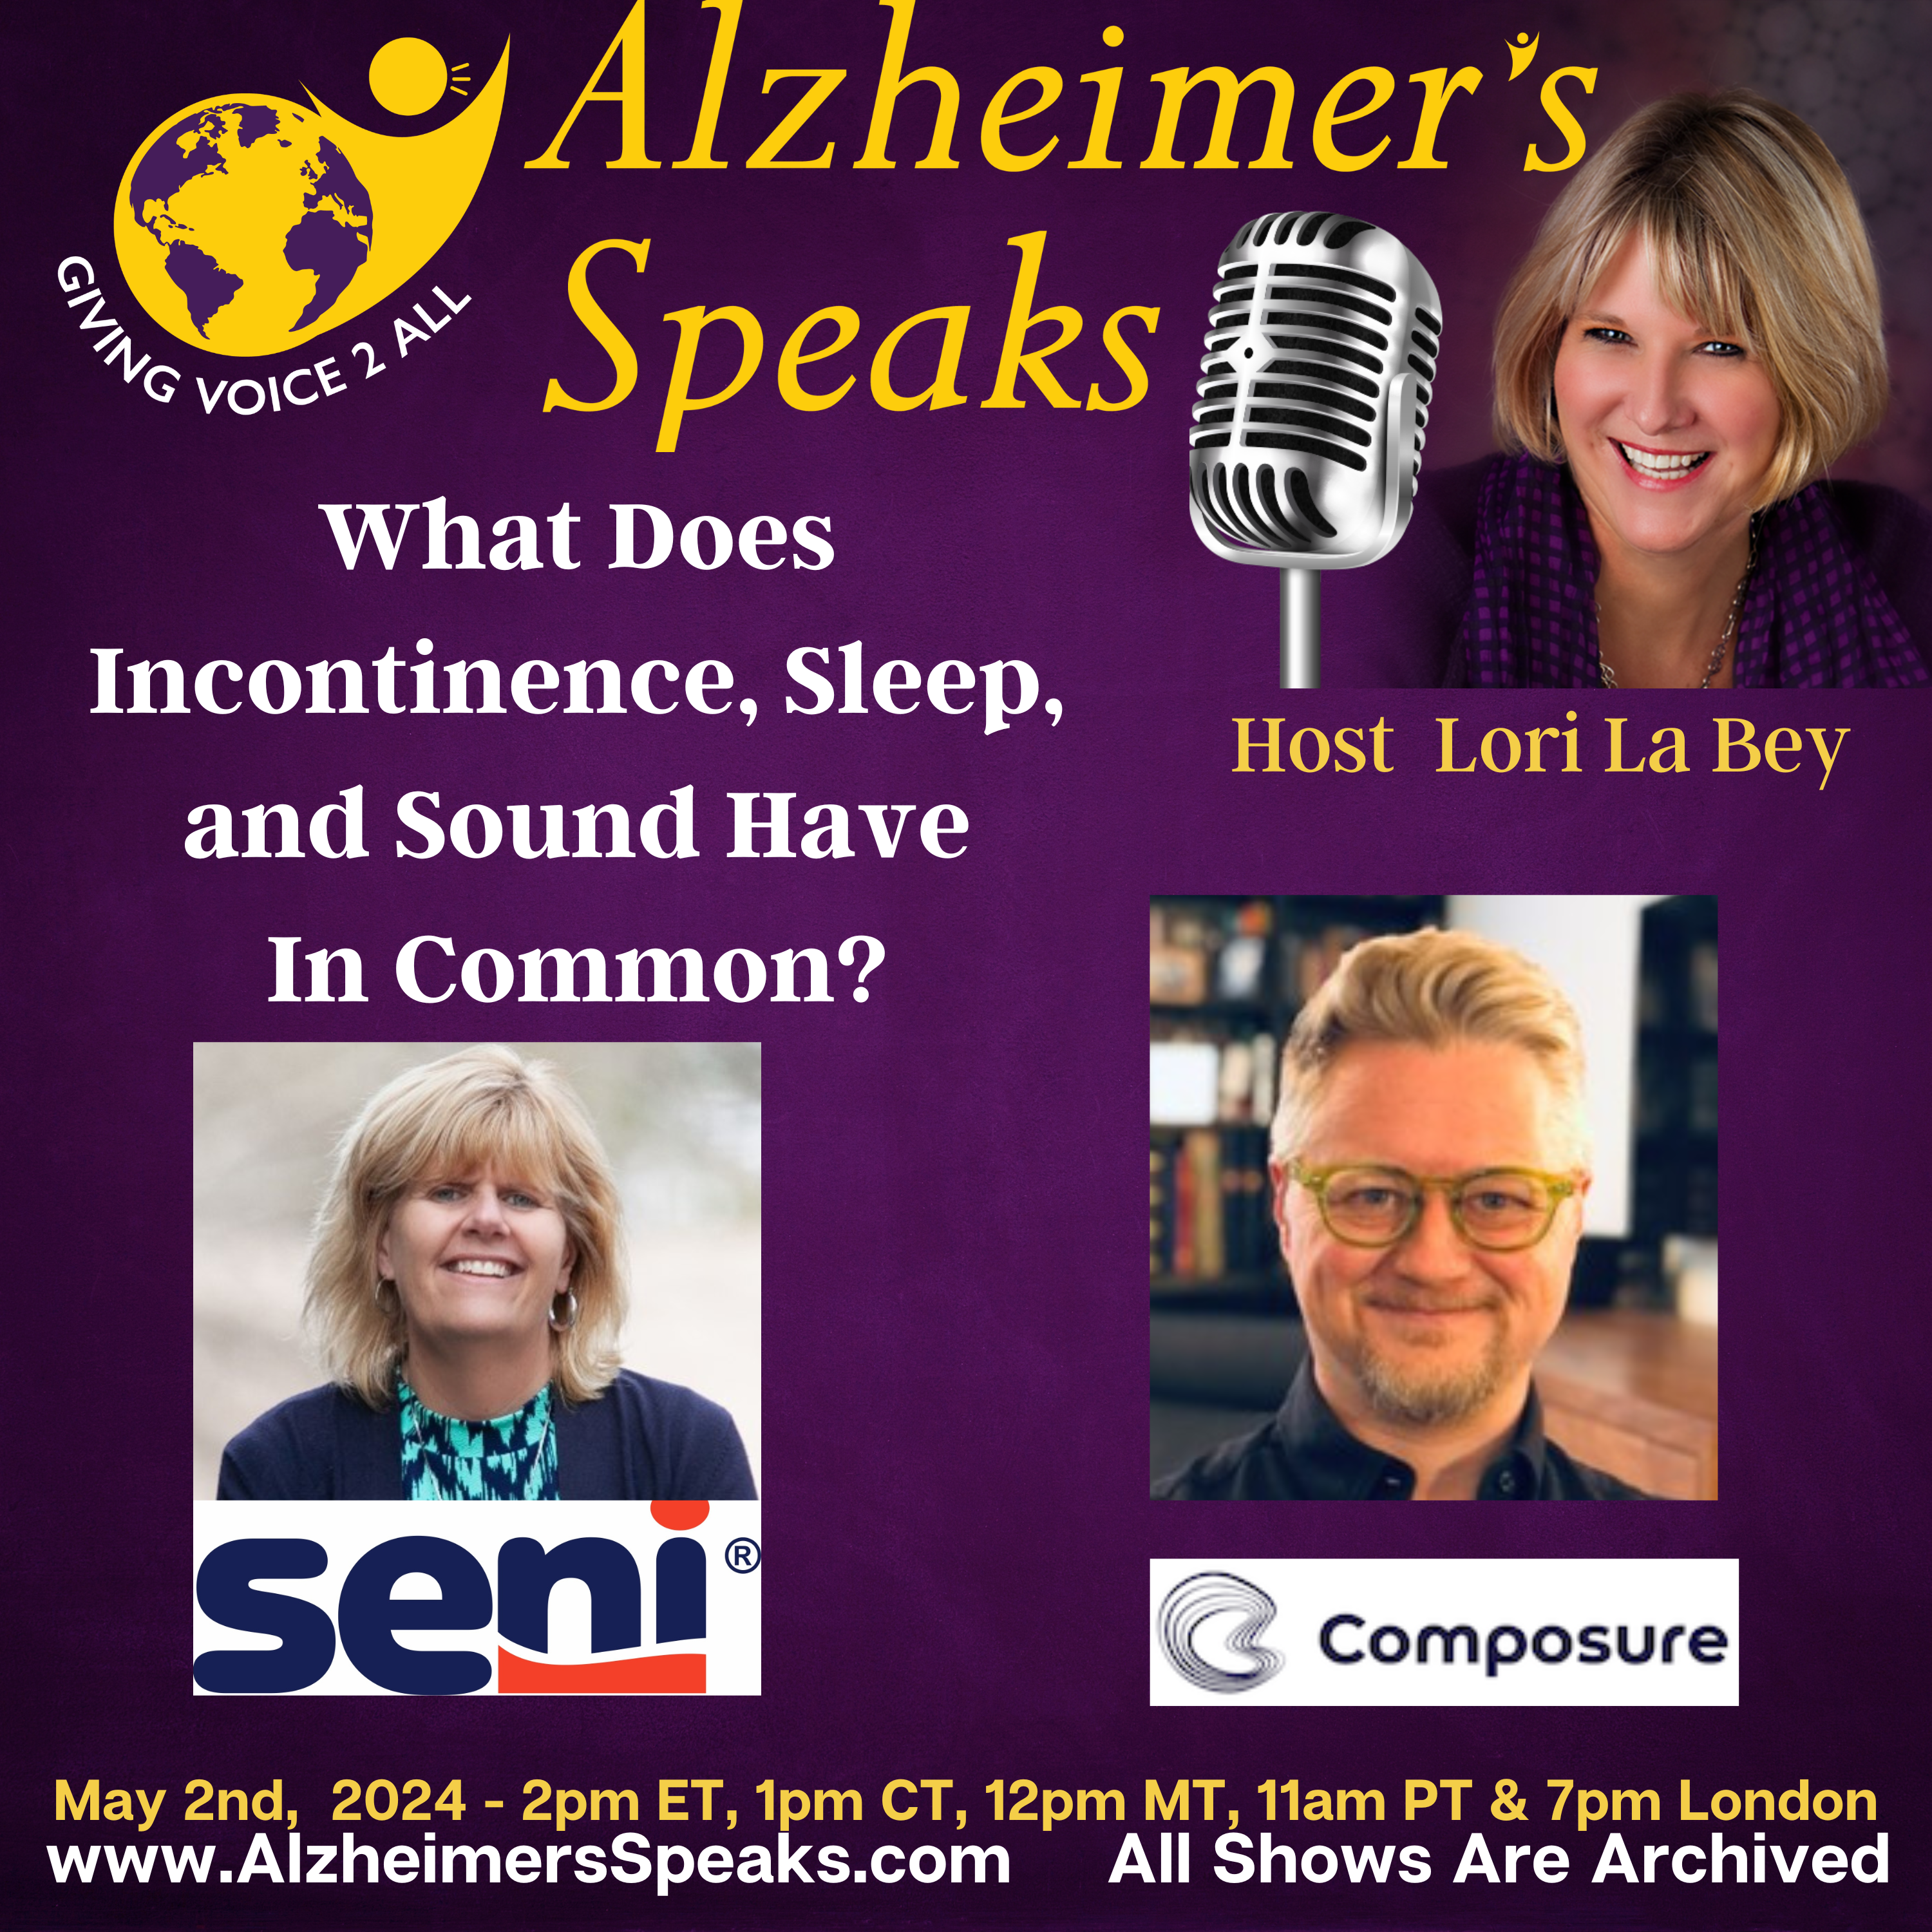 What Does Incontinence, Sound, and Sleep Have In Common? Part 1 of 2